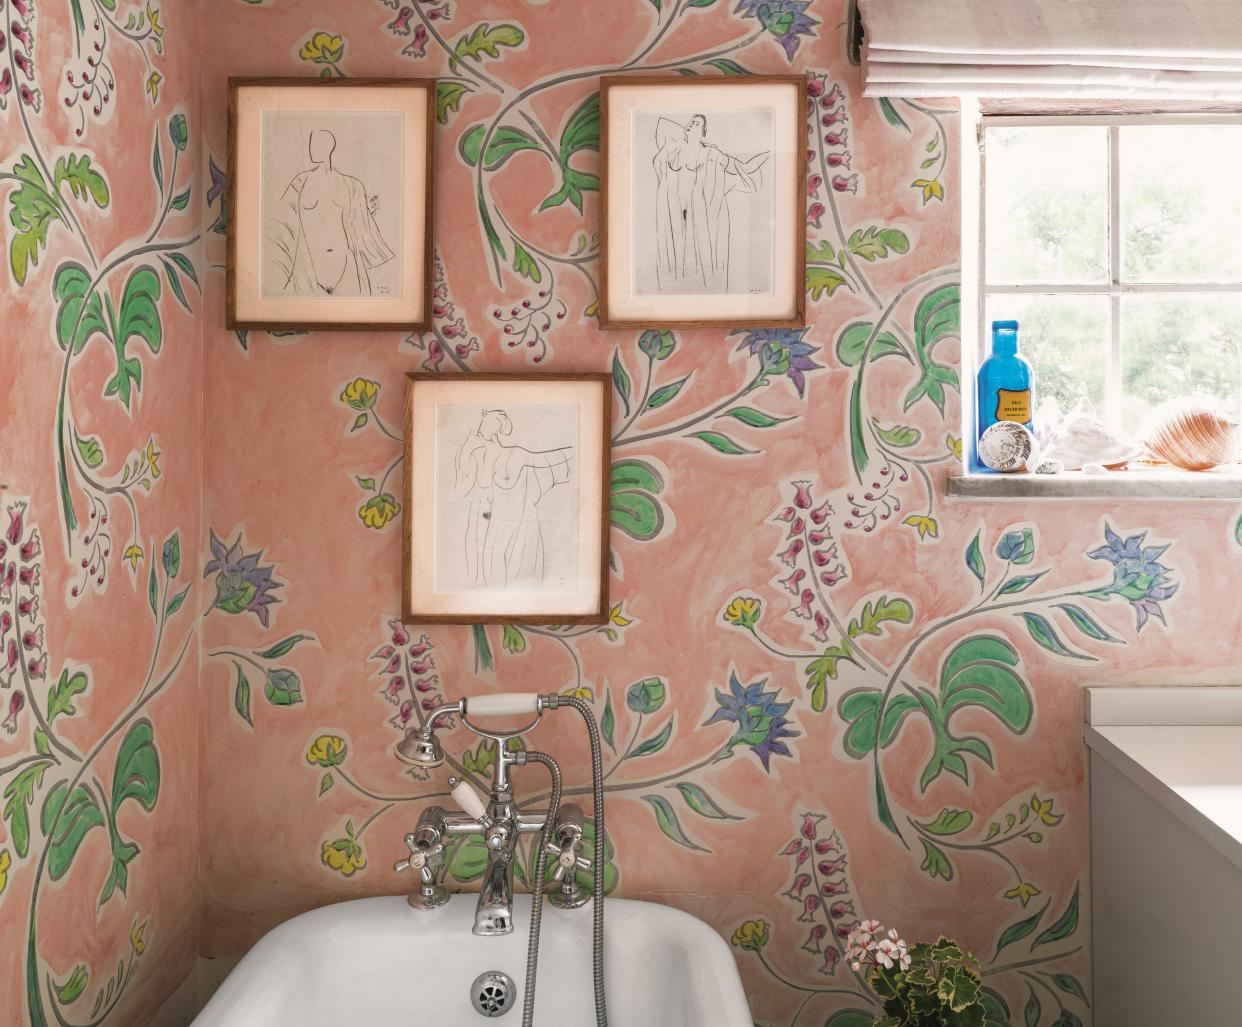  A bathroom with a bright pink botanical wallpaper and three sketched on the wall. 